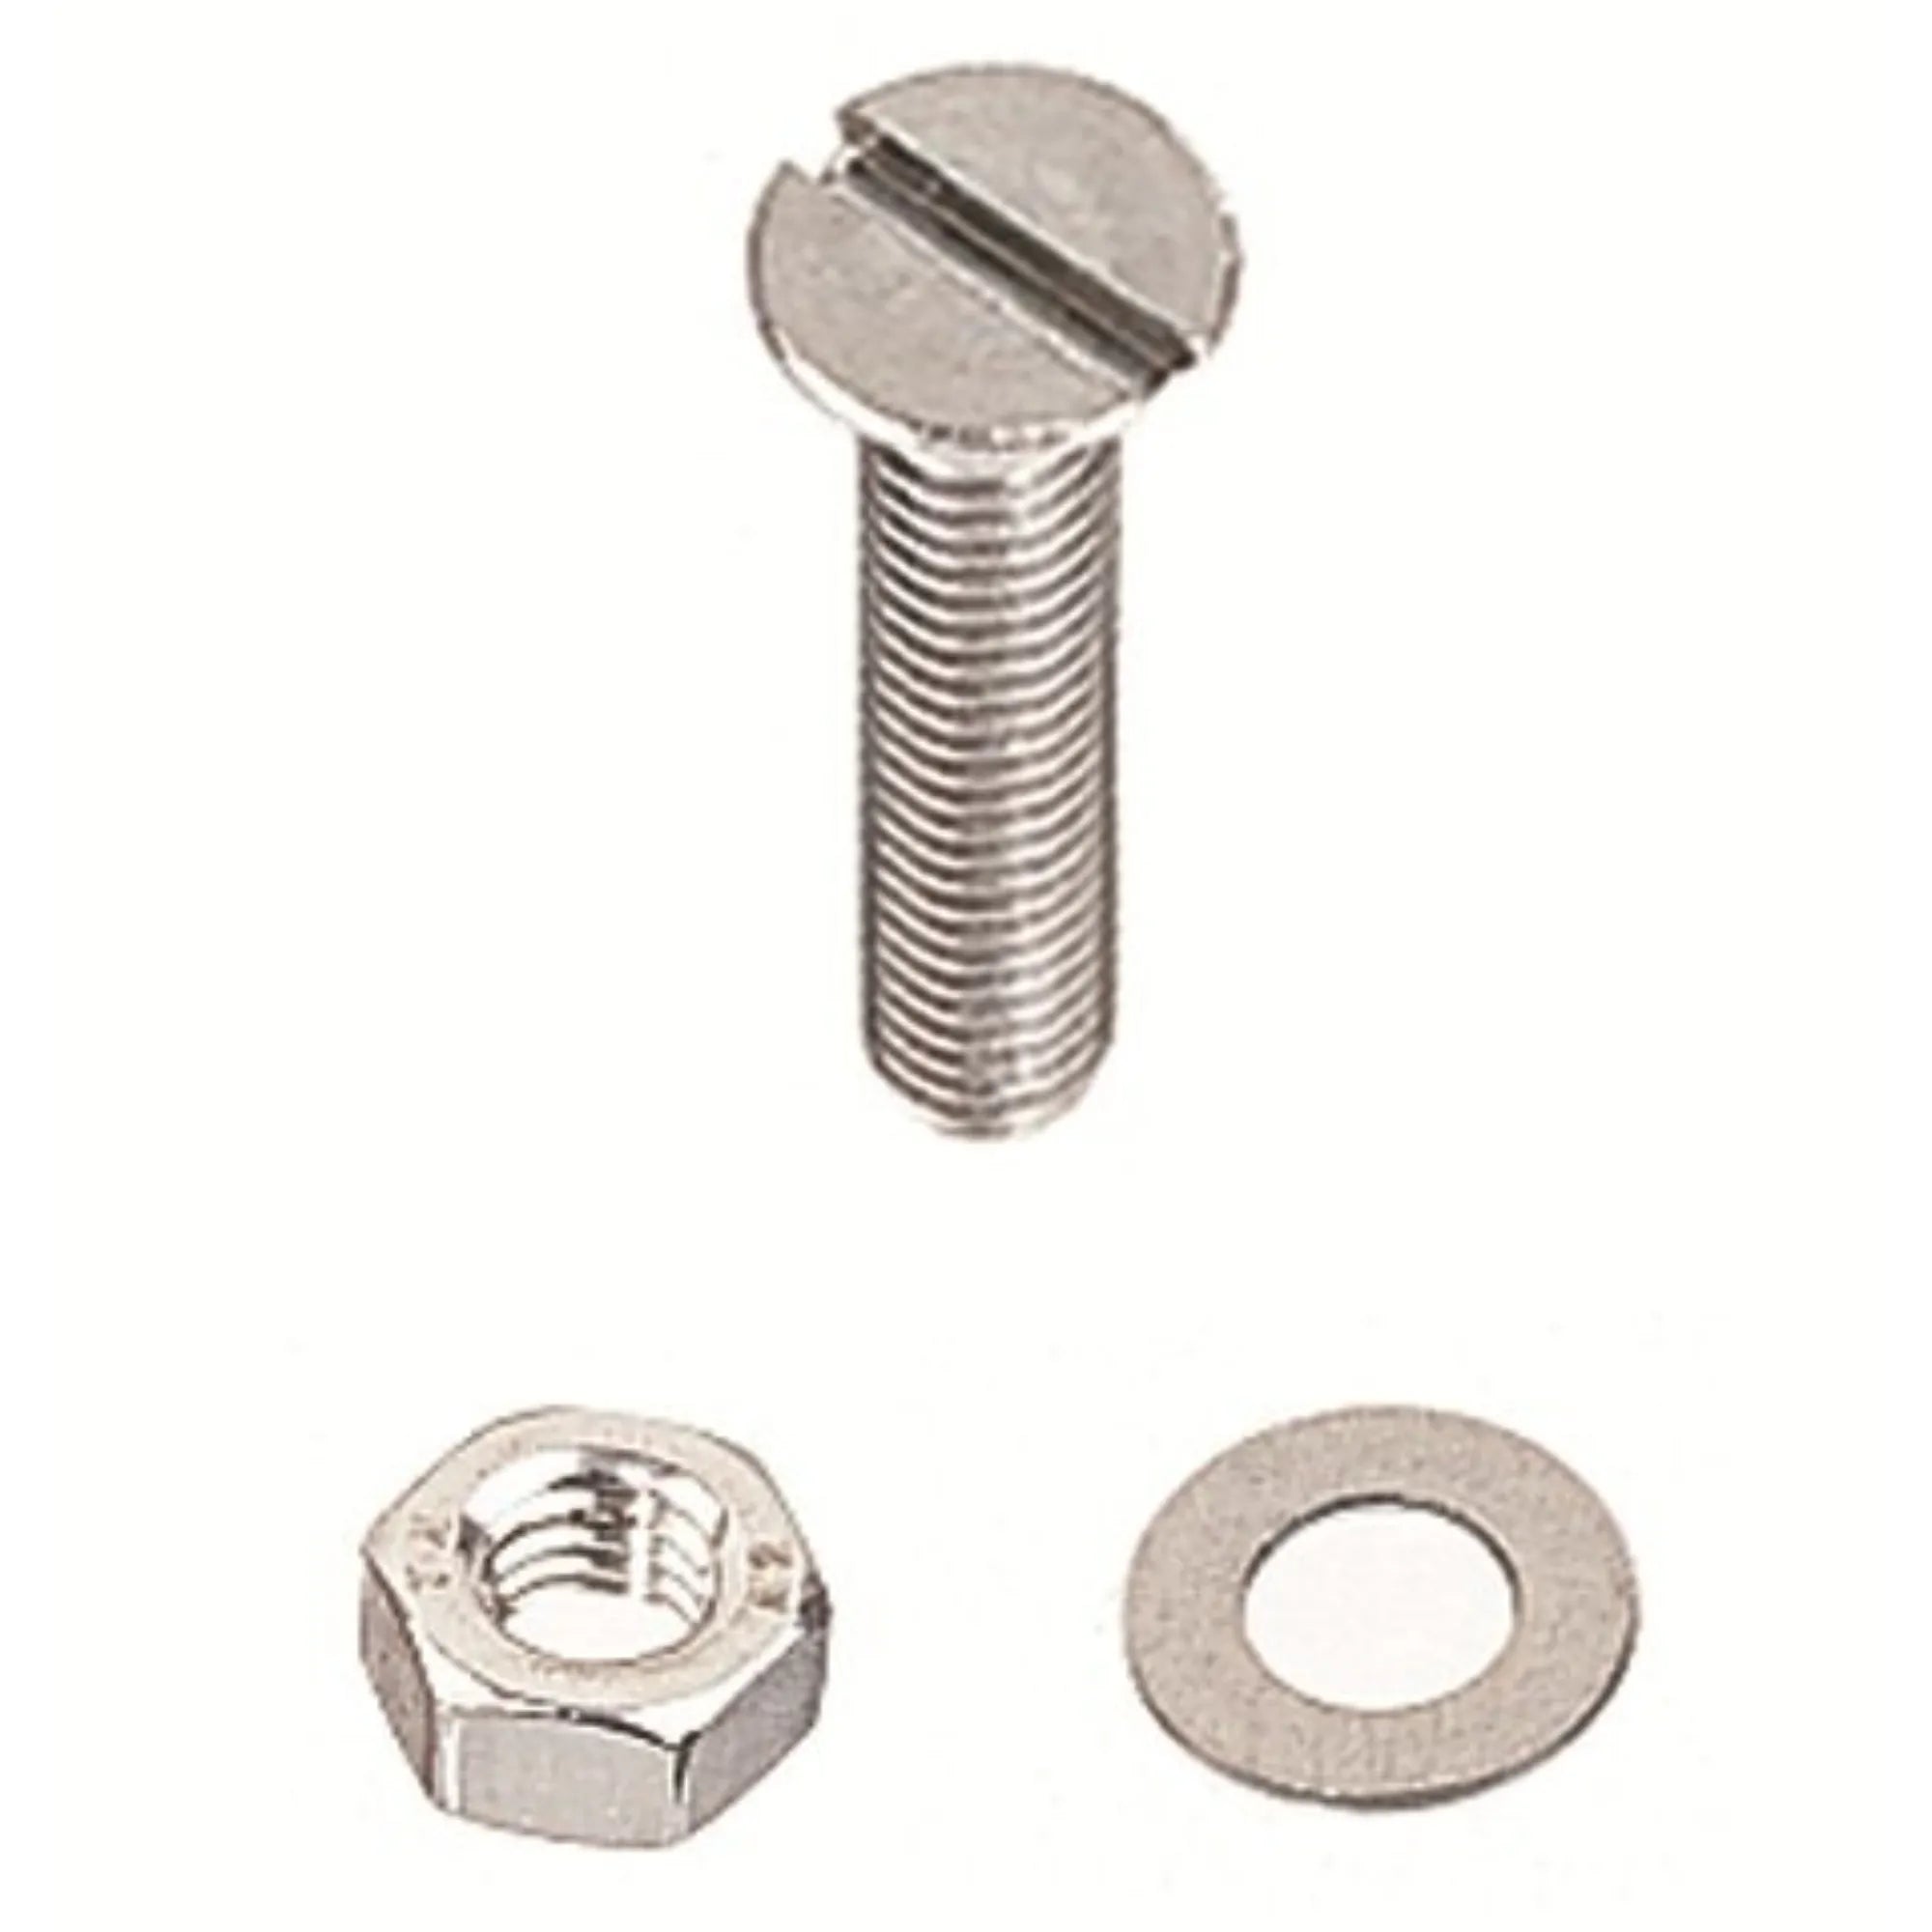 A4 Stainless Steel Countersunk Slotted Machine Screws